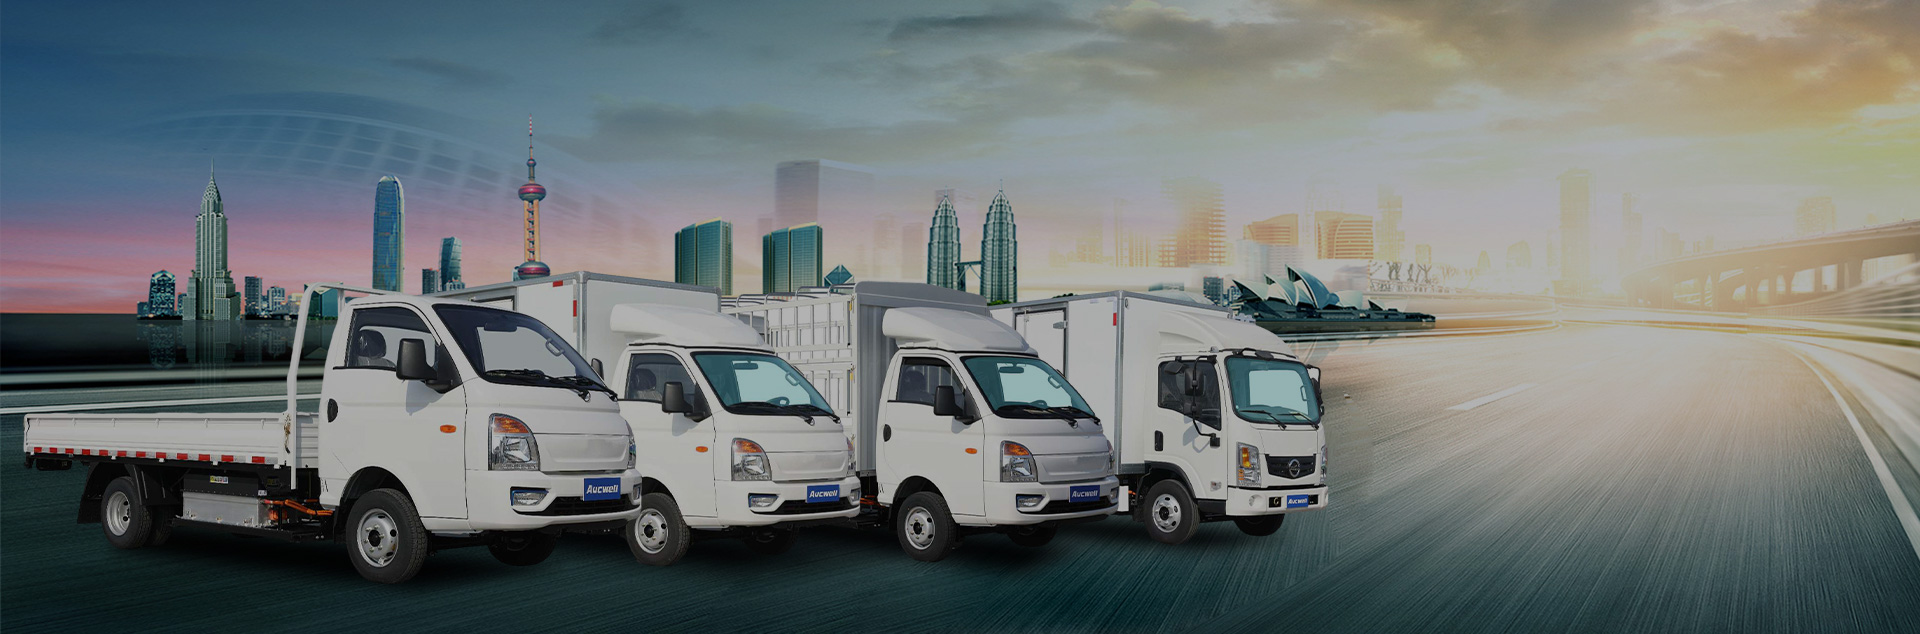 Aucwell Electric Commercial Vehicles